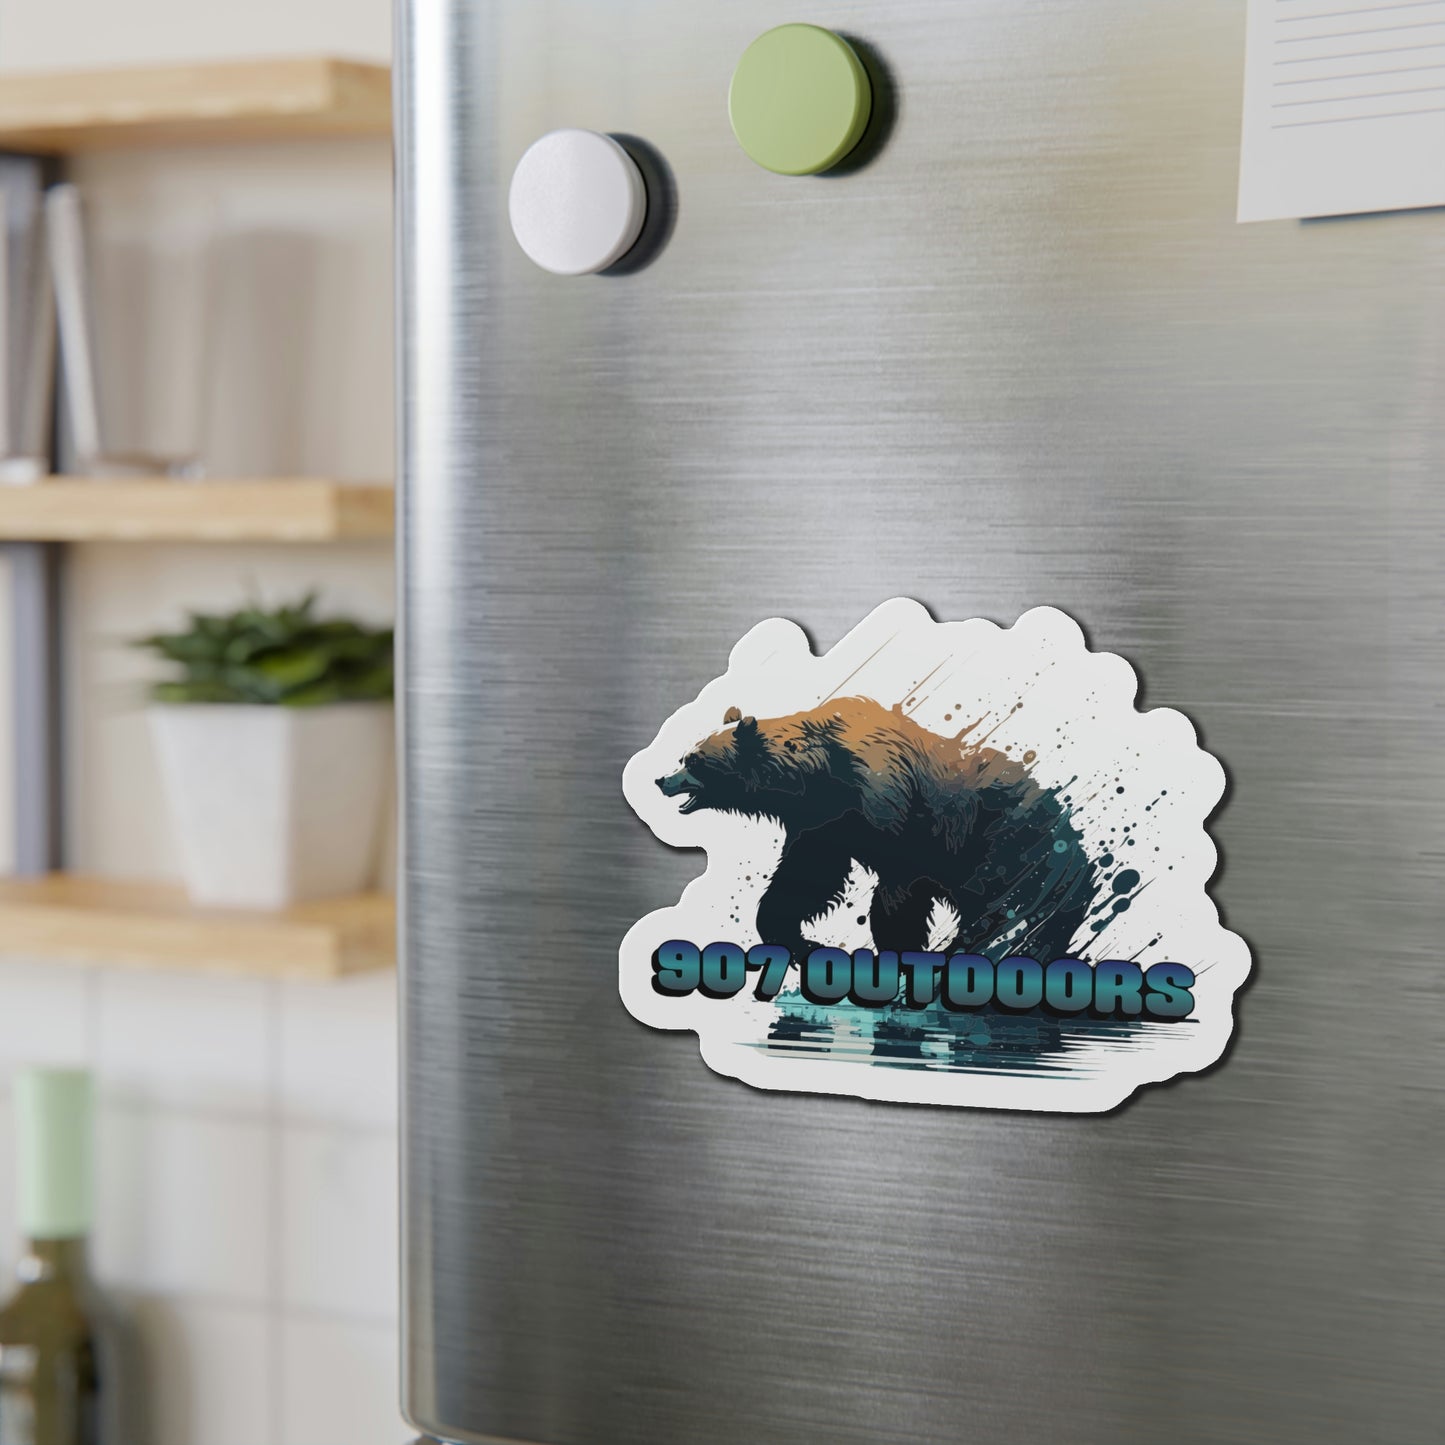 River Bear Die-Cut Magnets - 907Outdoors